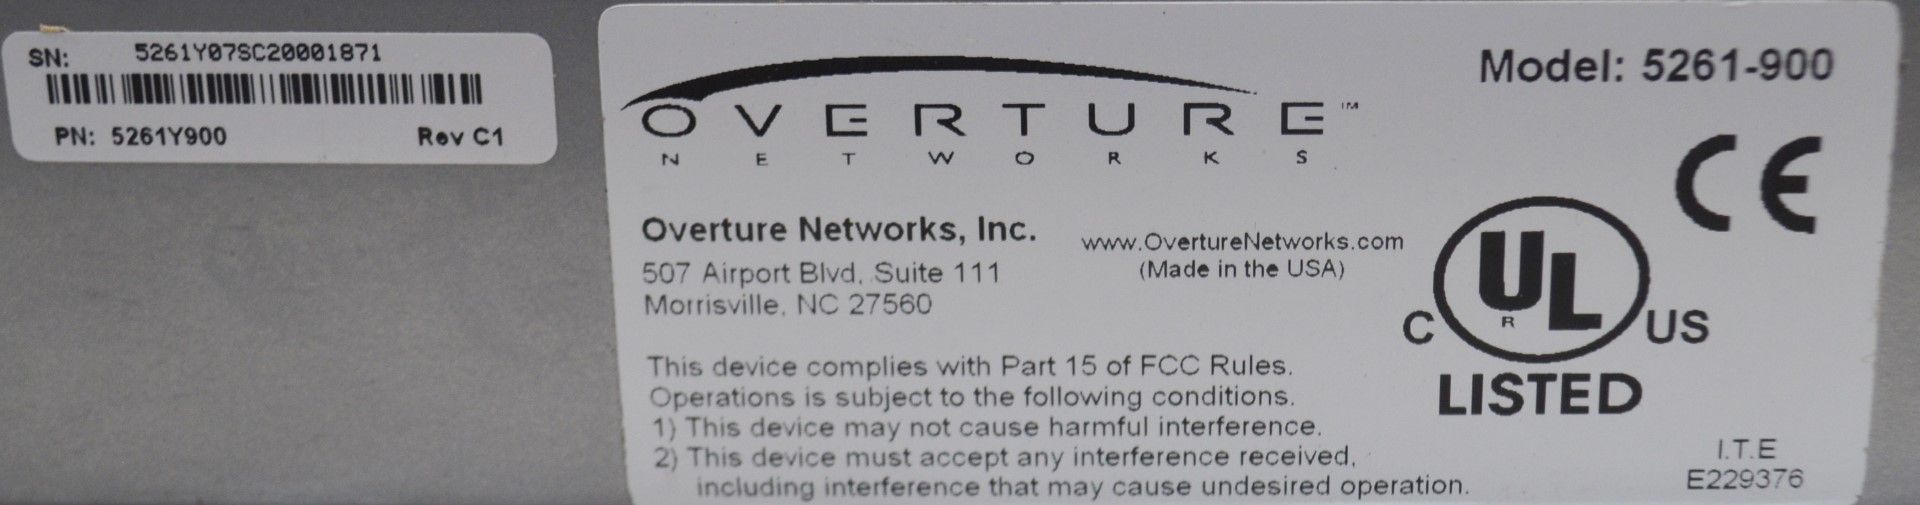 1 x Overture ISG 140M 5266-900/ 4 Port Carrier Ethernet over 10/100 - CL011 - Ref: DNW317 / WH3 - - Image 3 of 3